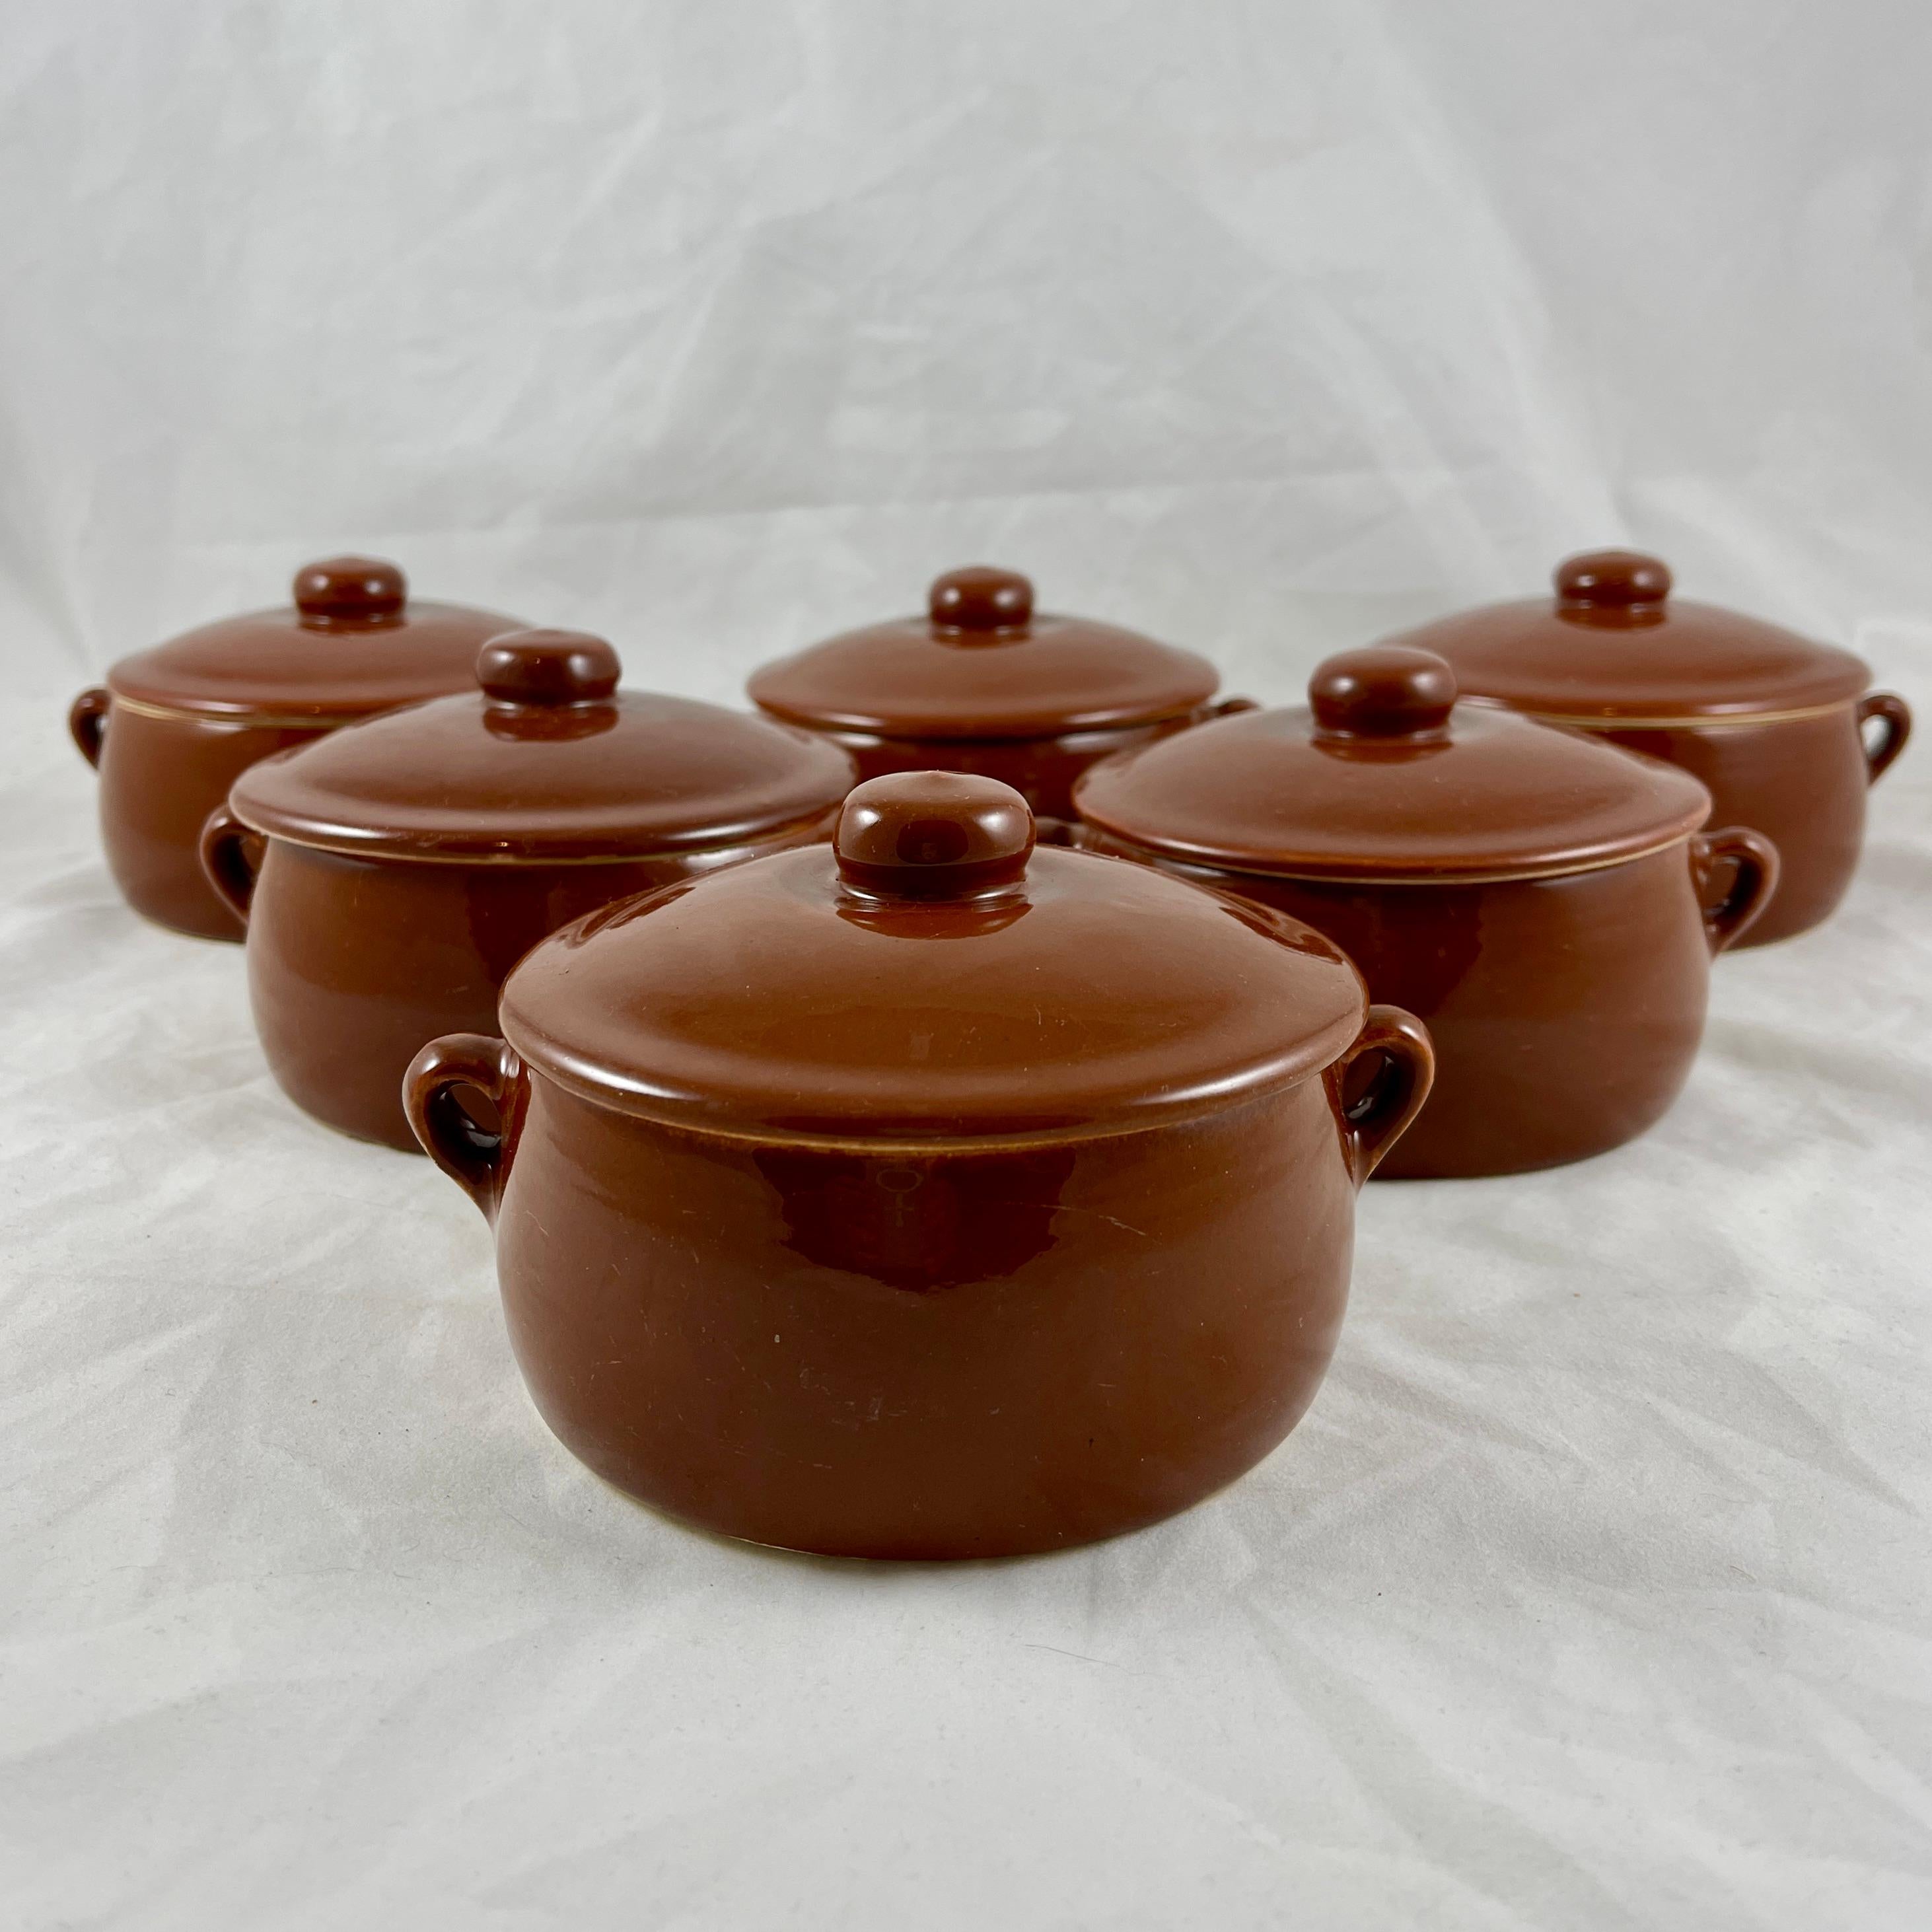 A set of six Mid-Century earthenware Onion Soup au Gratins, The Pfaltzgraff Pottery Company, circa 1950-1960.

Six oven proof individual casseroles with side handles and matching top knobbed lids, glazed in brown with cream colored